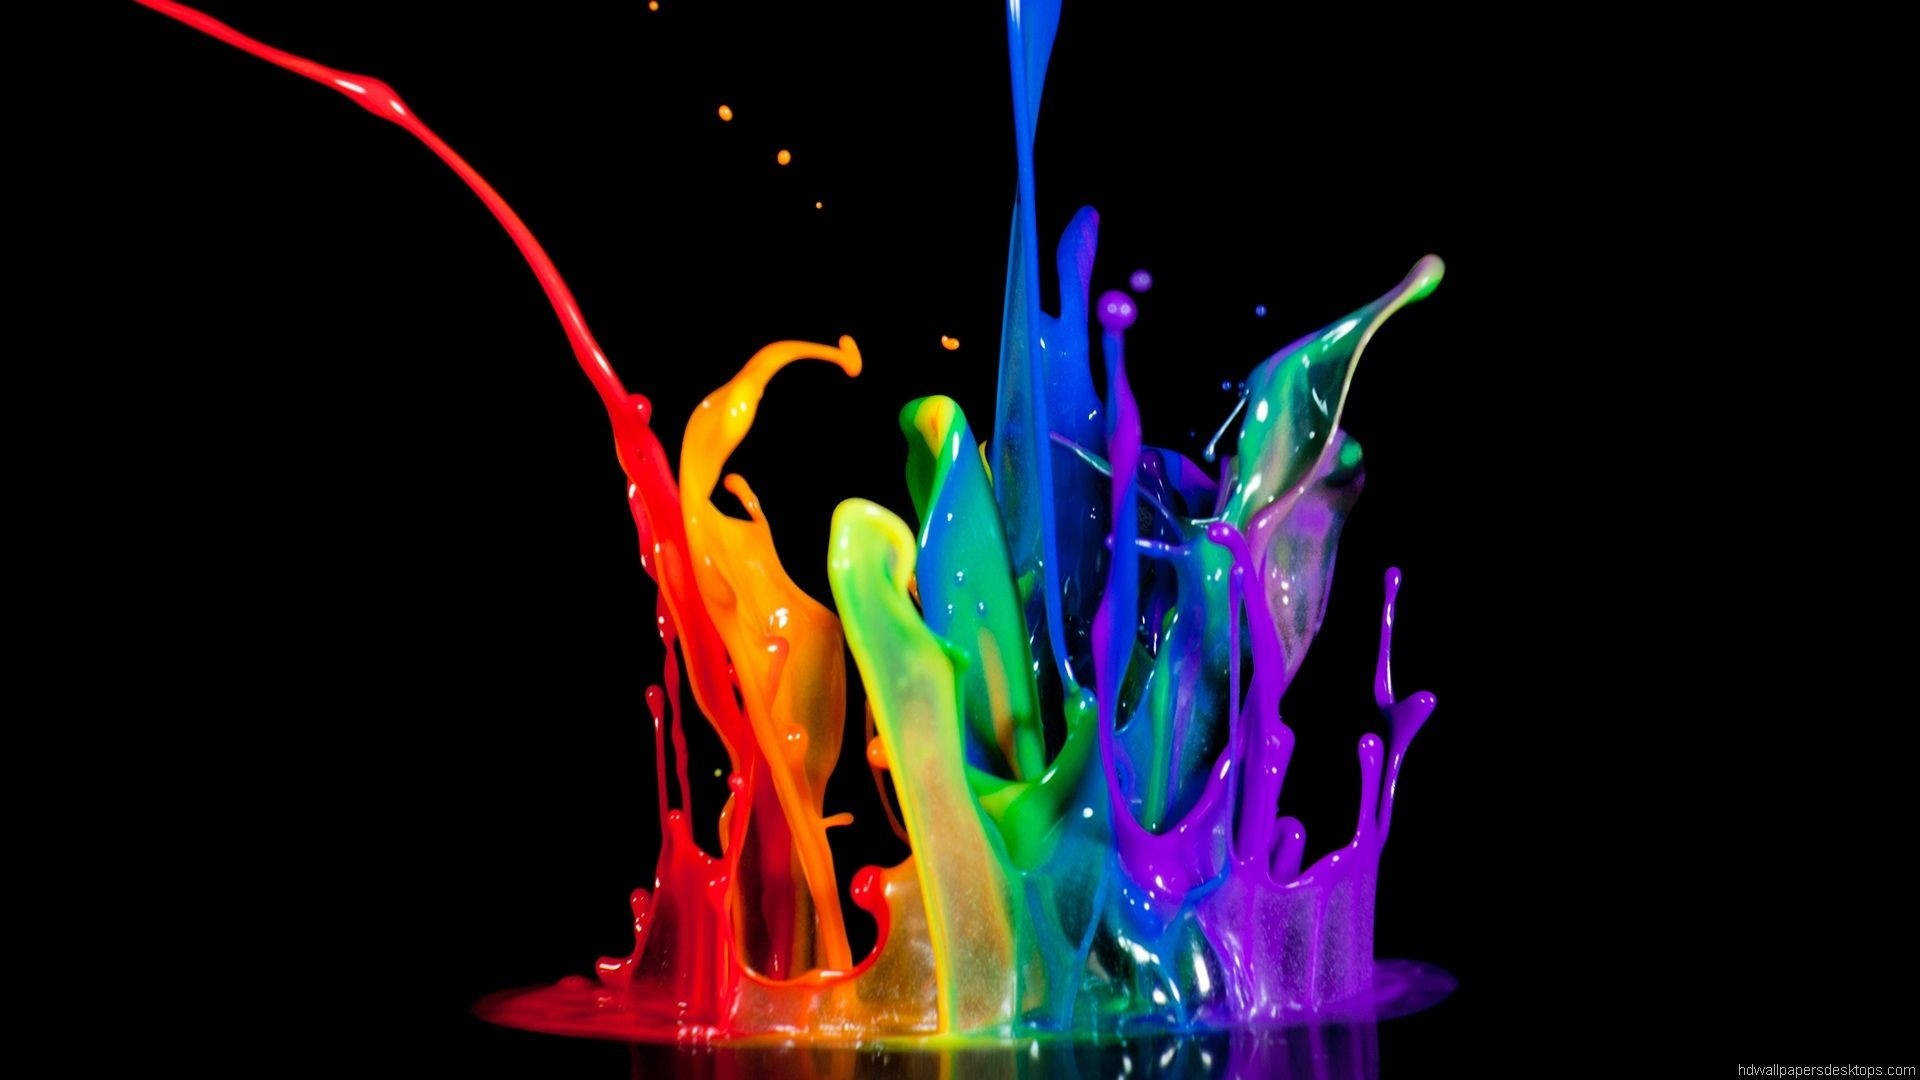 1920x1080 colorful desktop backgrounds wallpaper - colors of the rainbow